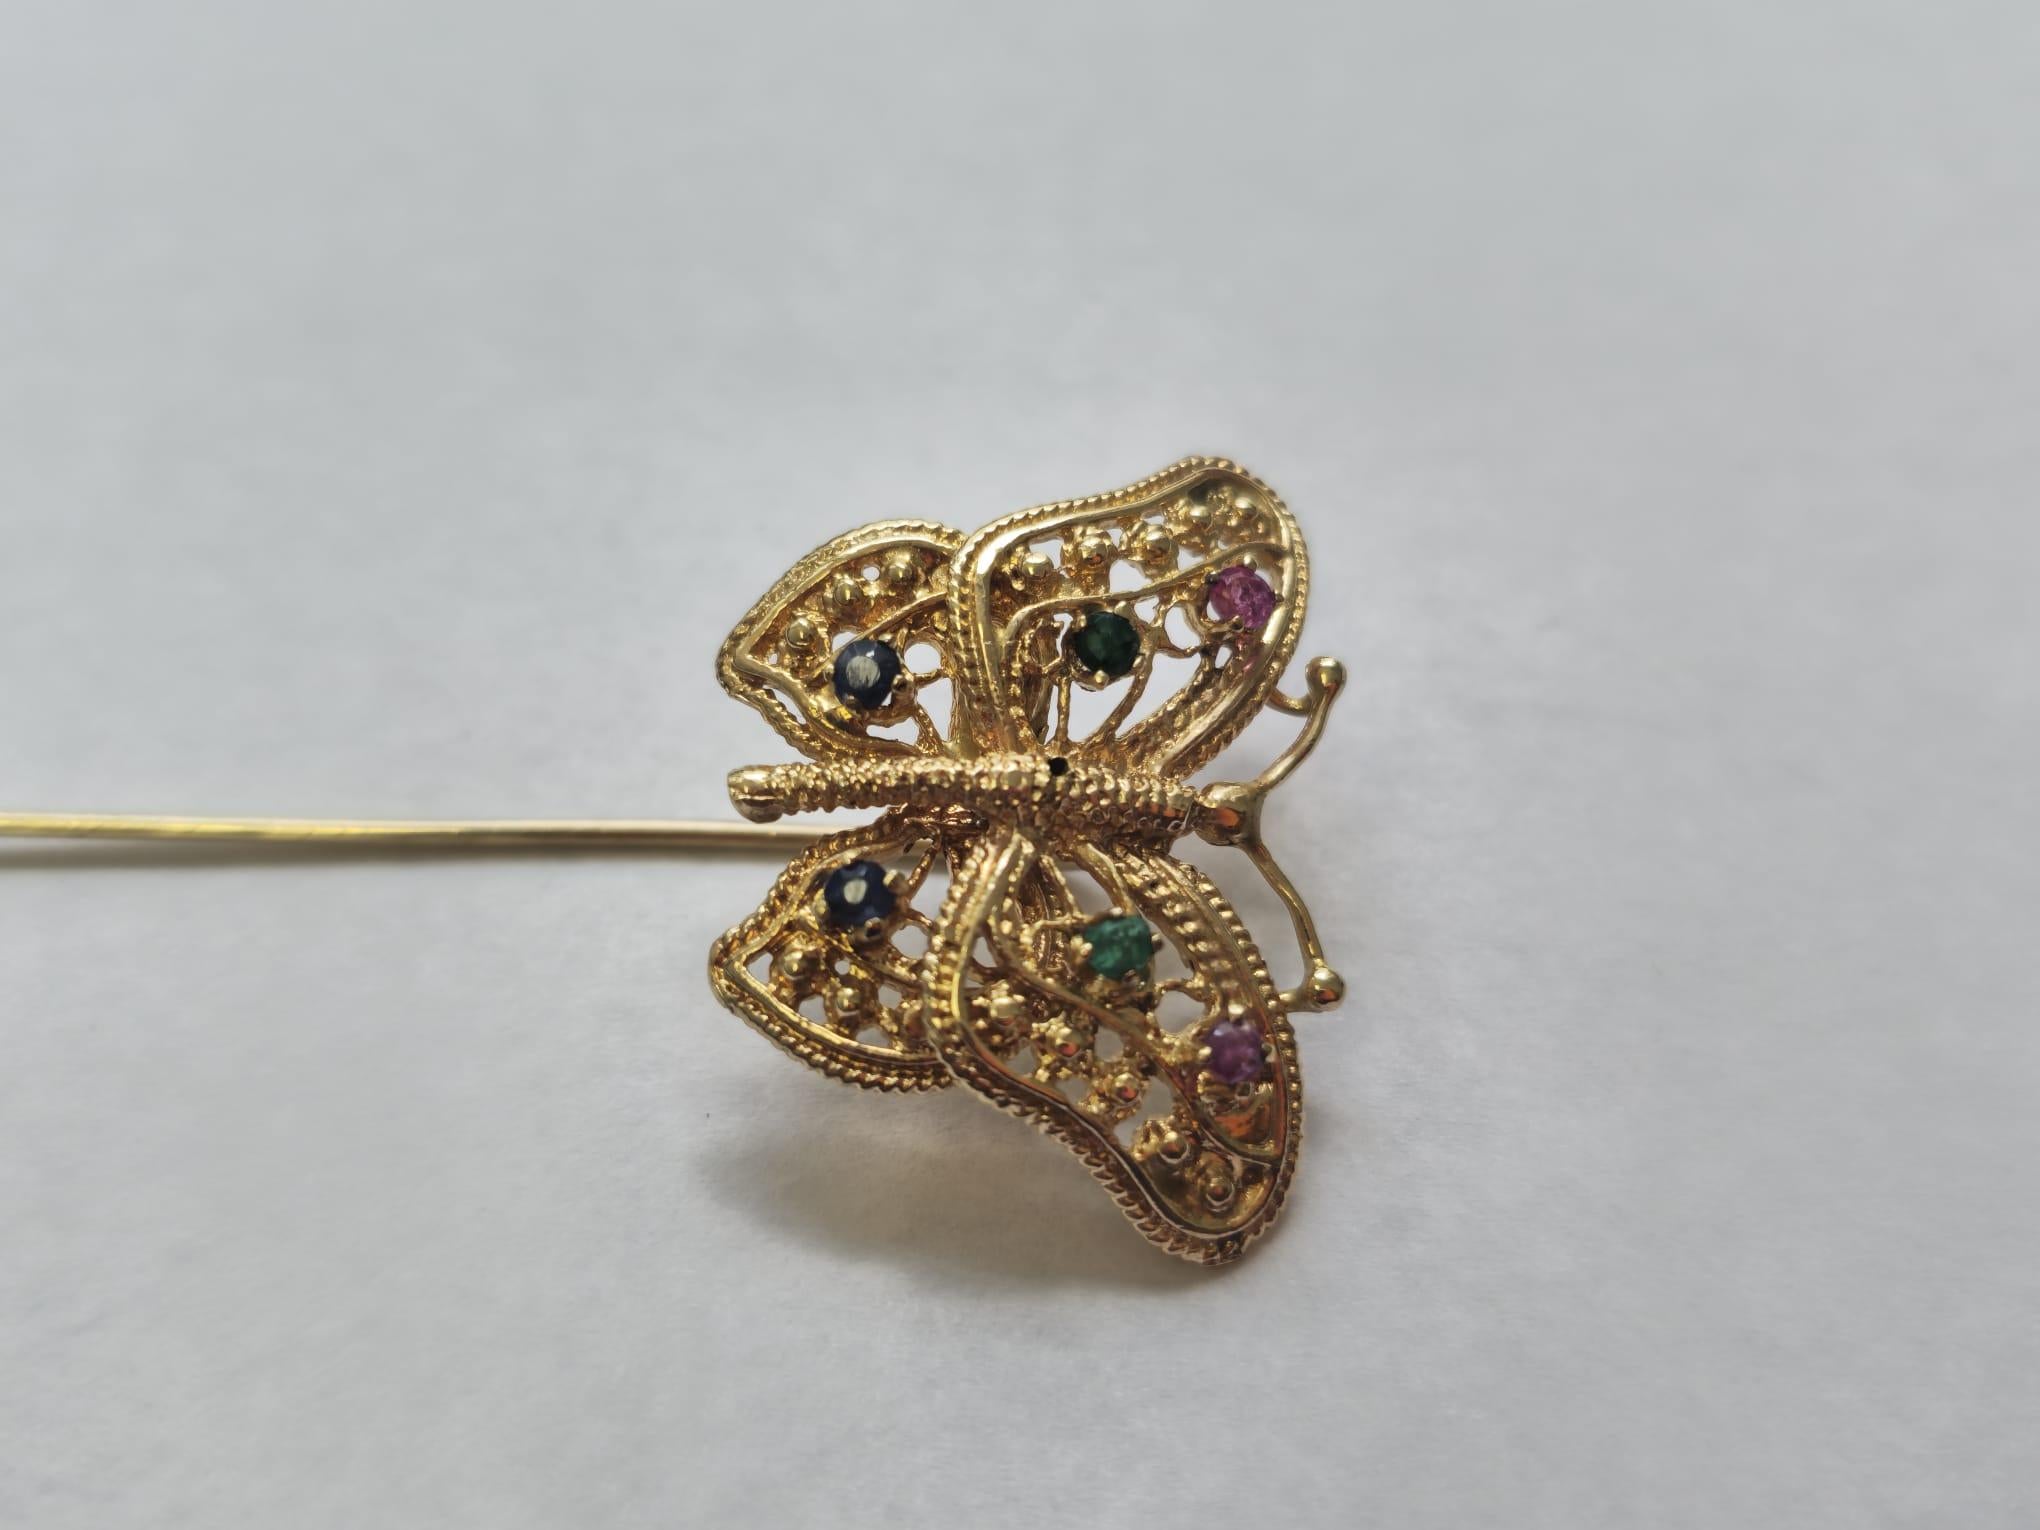 This multigemstone pin is crafted from 18k gold and weighs 4.2 grams, showcasing vibrant emerald, ruby, and sapphire gemstones totaling 0.25 carats. The combination of these colorful gemstones adds a striking touch to this elegant pin, making it a